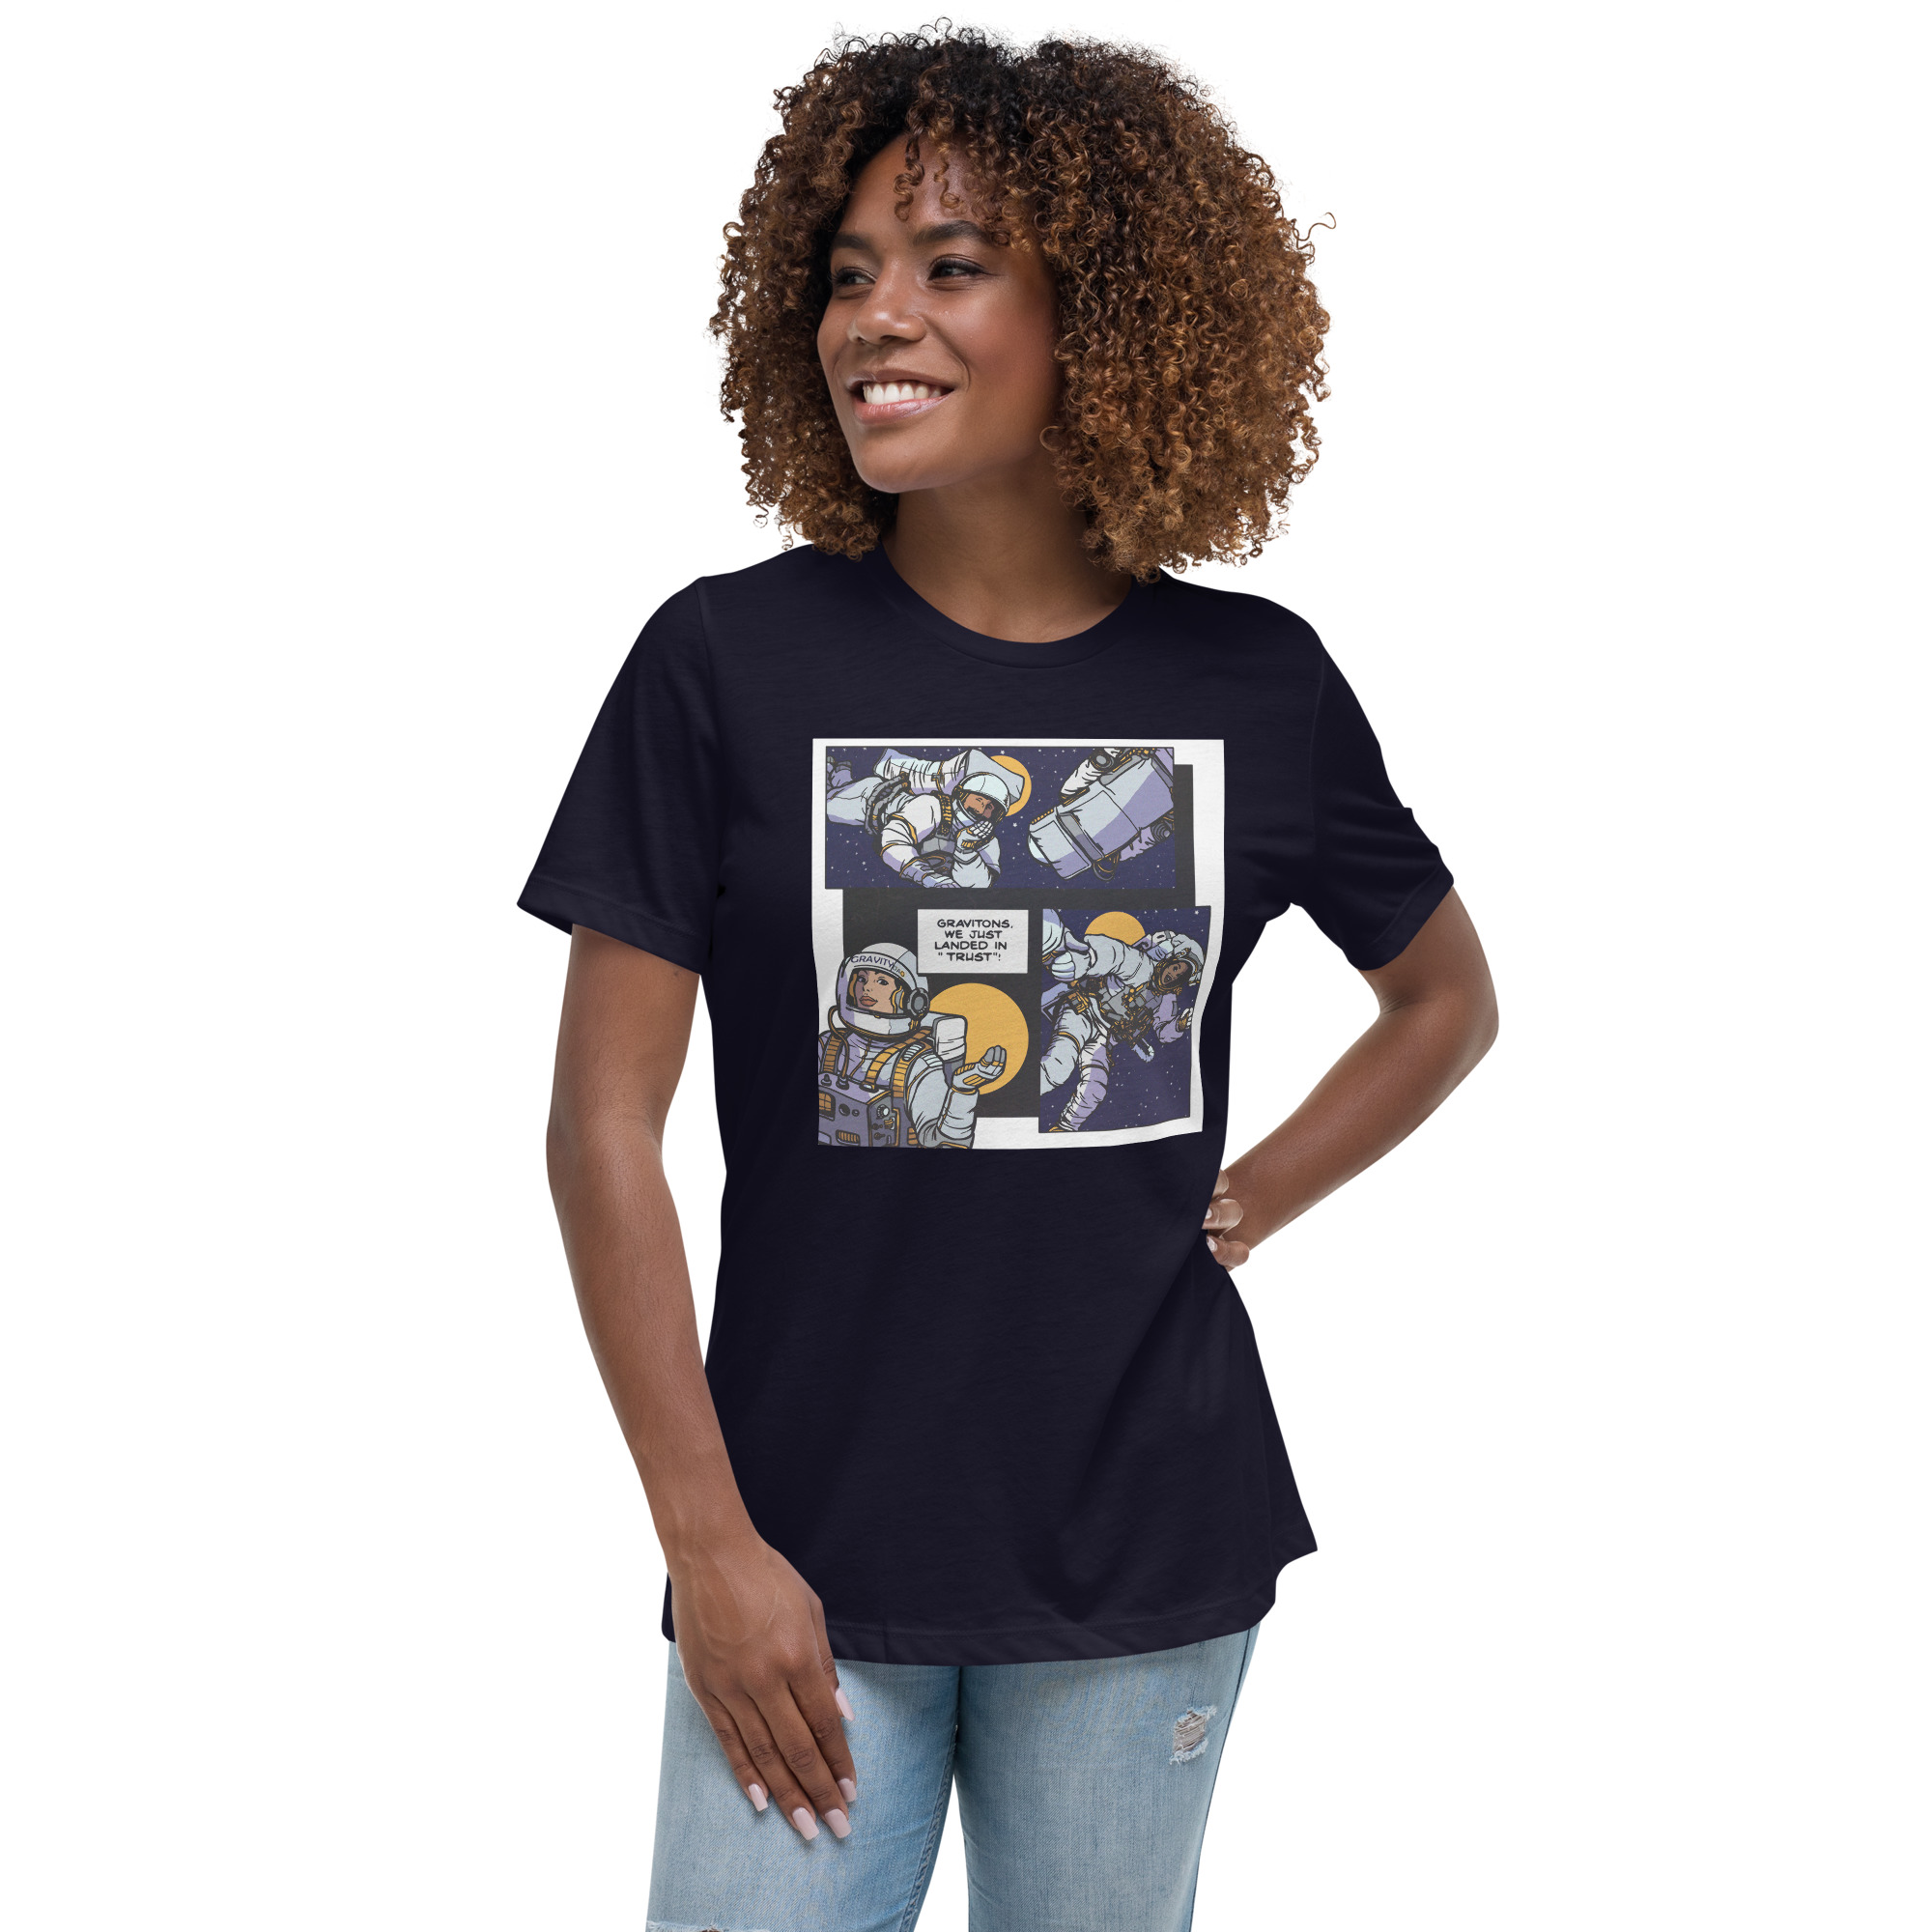 womens-relaxed-t-shirt-navy-front-64138ee23806b.jpg